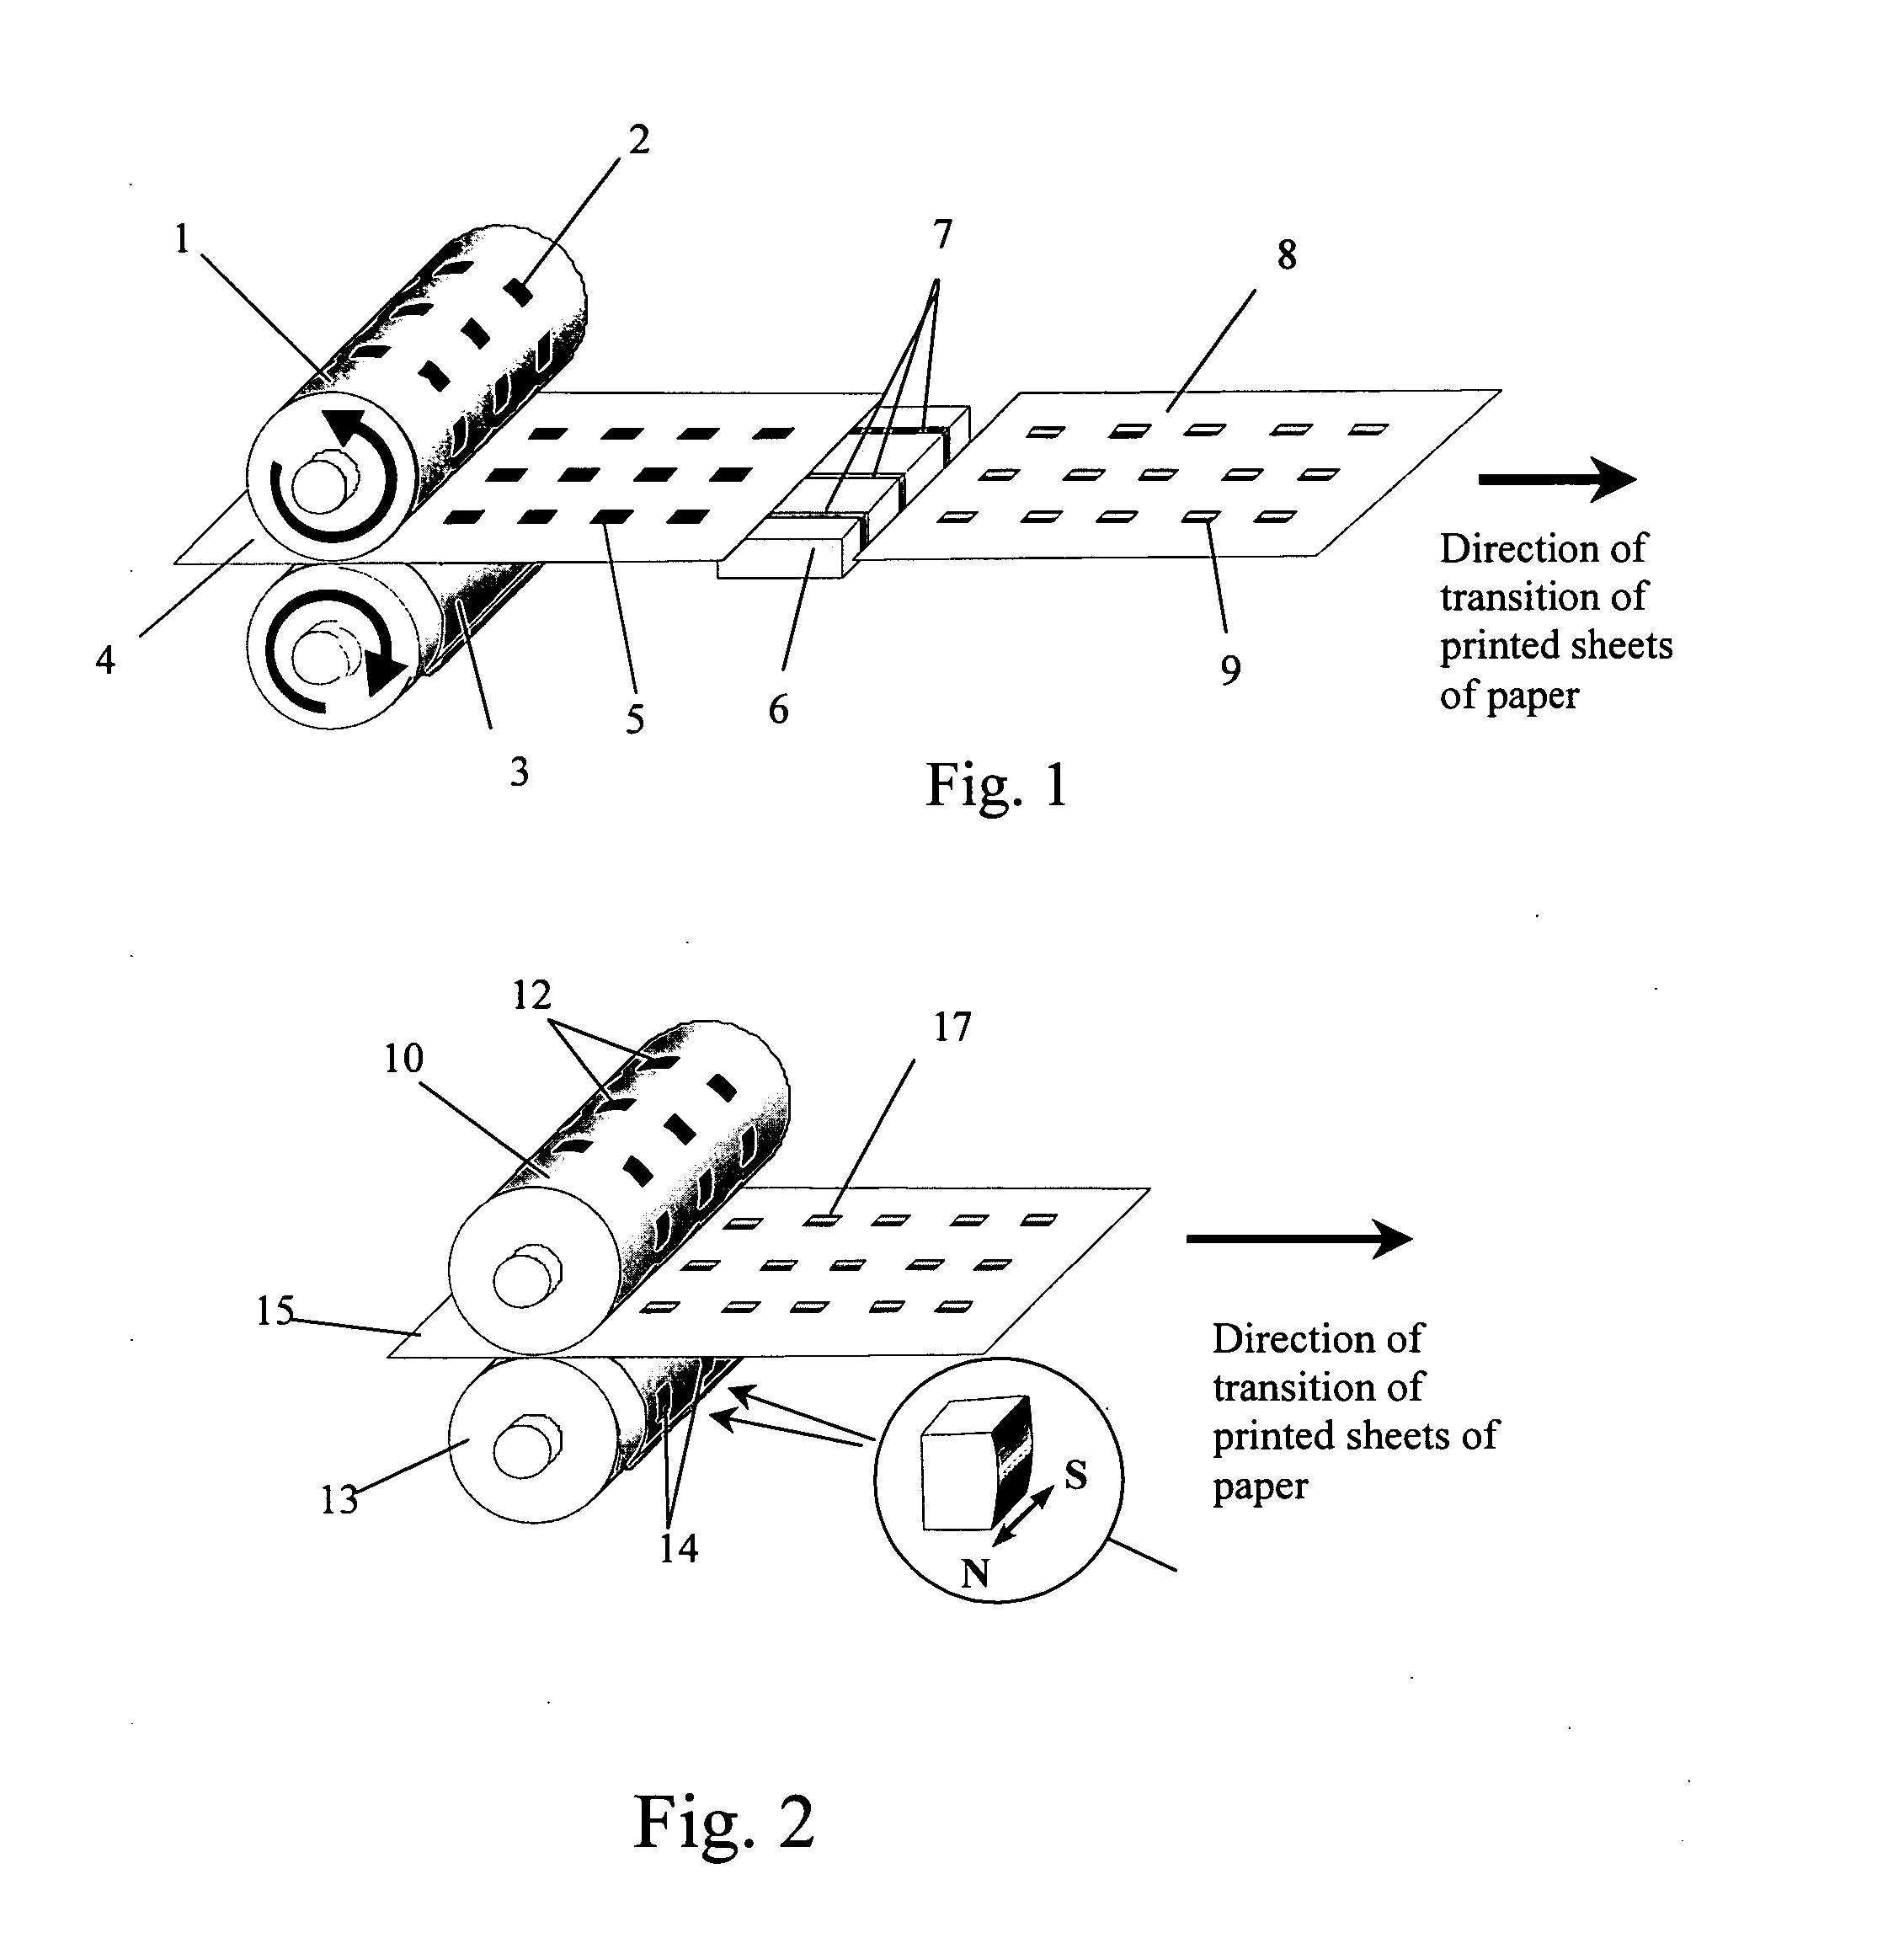 Alignment of paste-like ink having magnetic particles therein, and the printing of optical effects